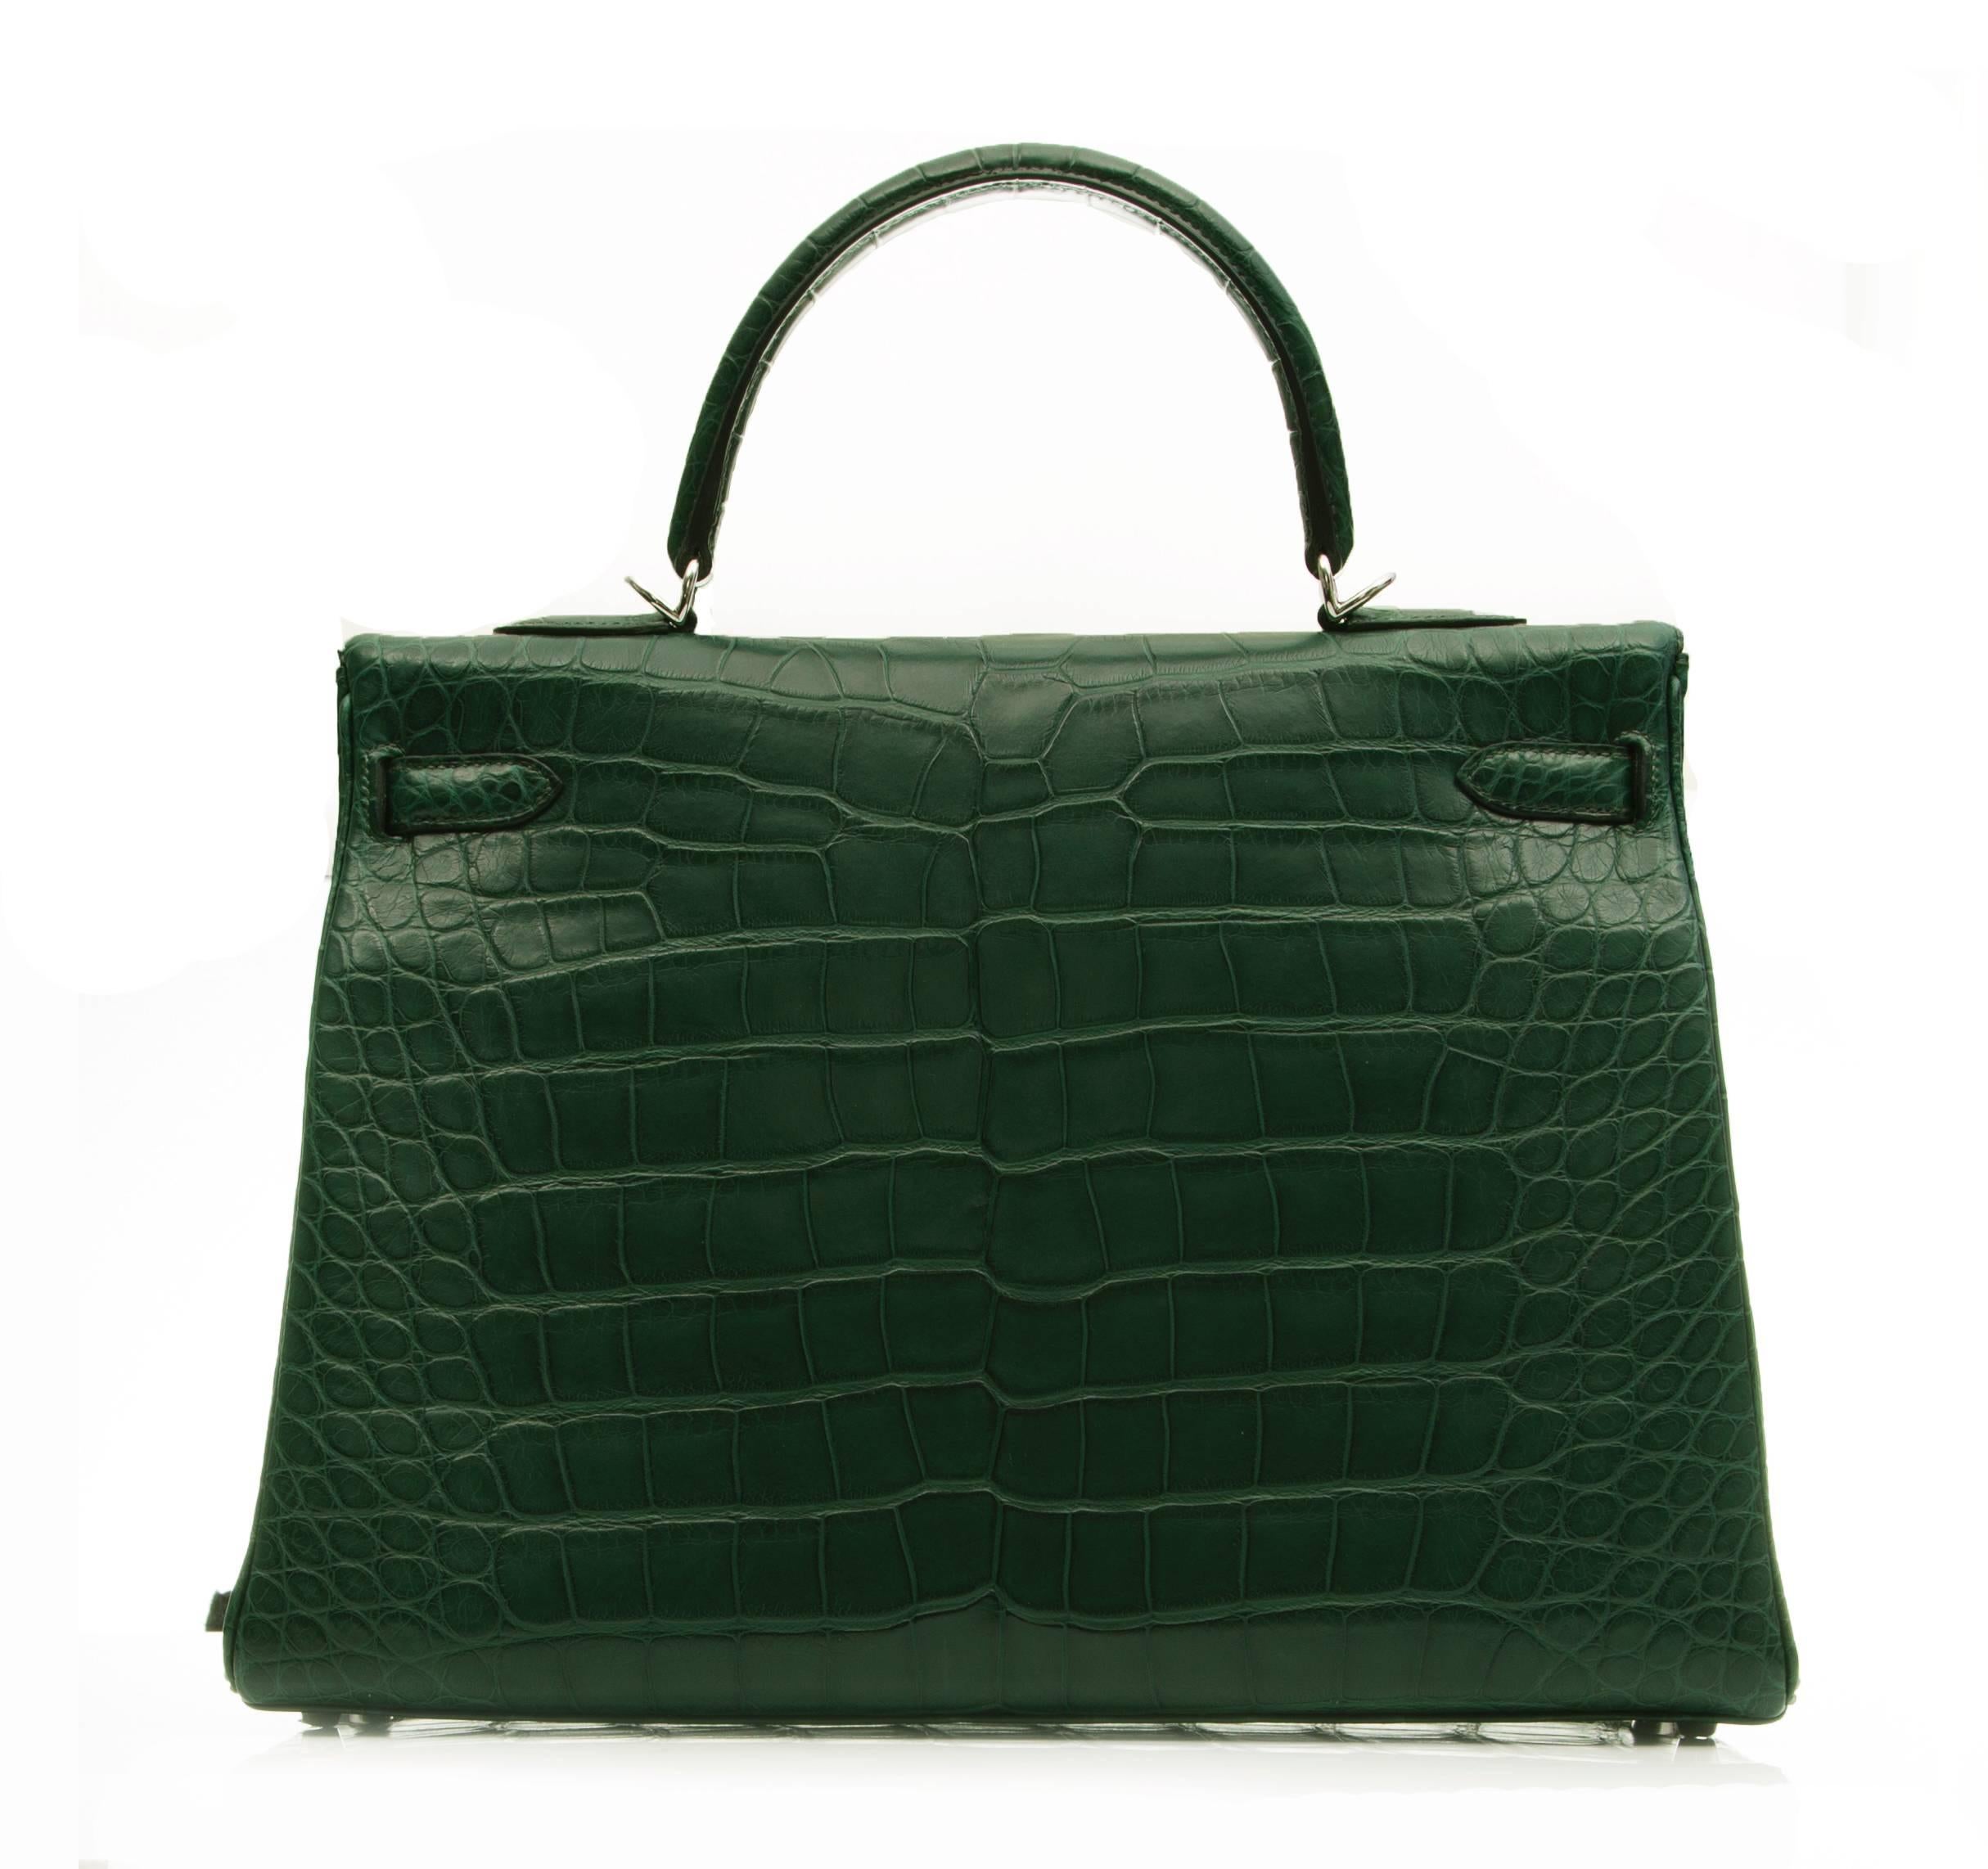 The ultimate ladylike companion, this edition of the Hermès Kelly handbag is crafted in matte alligator leather. In Hermès' dark green shade of Vert Foncé, the tote bag is offset with palladium hardware. The spacious interior of the Kelly 35